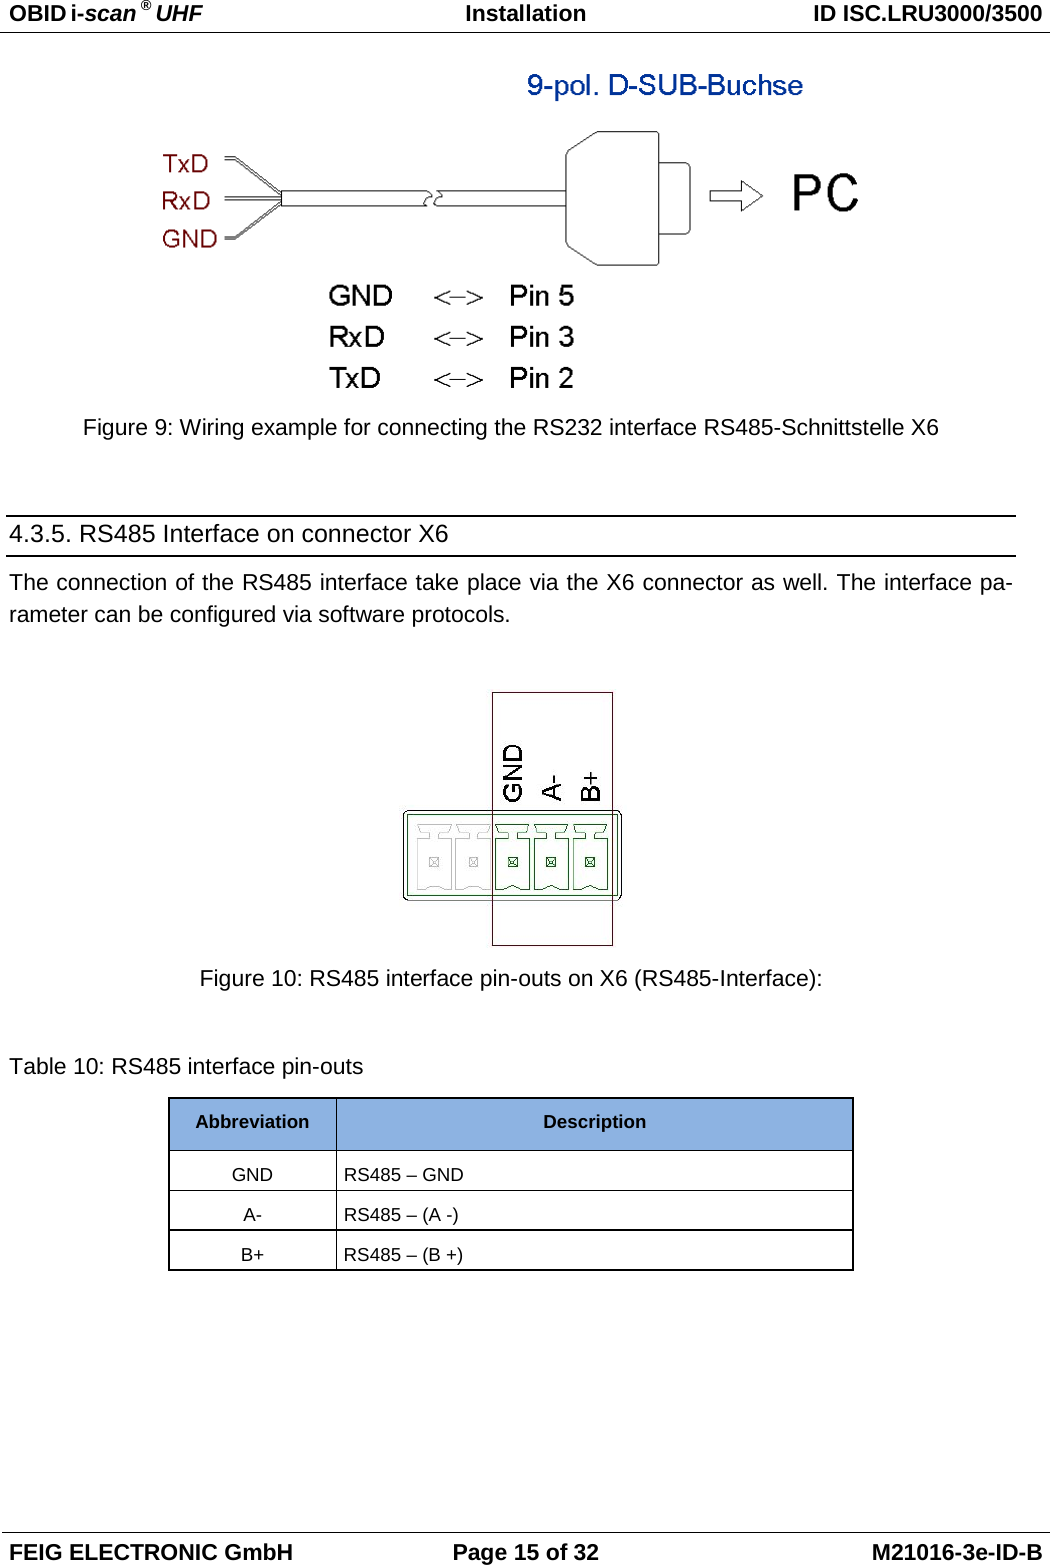 OBID i-scan ® UHF Installation ID ISC.LRU3000/3500  FEIG ELECTRONIC GmbH Page 15 of 32 M21016-3e-ID-B   Figure 9: Wiring example for connecting the RS232 interface RS485-Schnittstelle X6  4.3.5. RS485 Interface on connector X6 The connection of the RS485 interface take place via the X6 connector as well. The interface pa-rameter can be configured via software protocols.    Figure 10: RS485 interface pin-outs on X6 (RS485-Interface):  Table 10: RS485 interface pin-outs Abbreviation Description GND RS485 – GND A-  RS485 – (A -) B+  RS485 – (B +)  